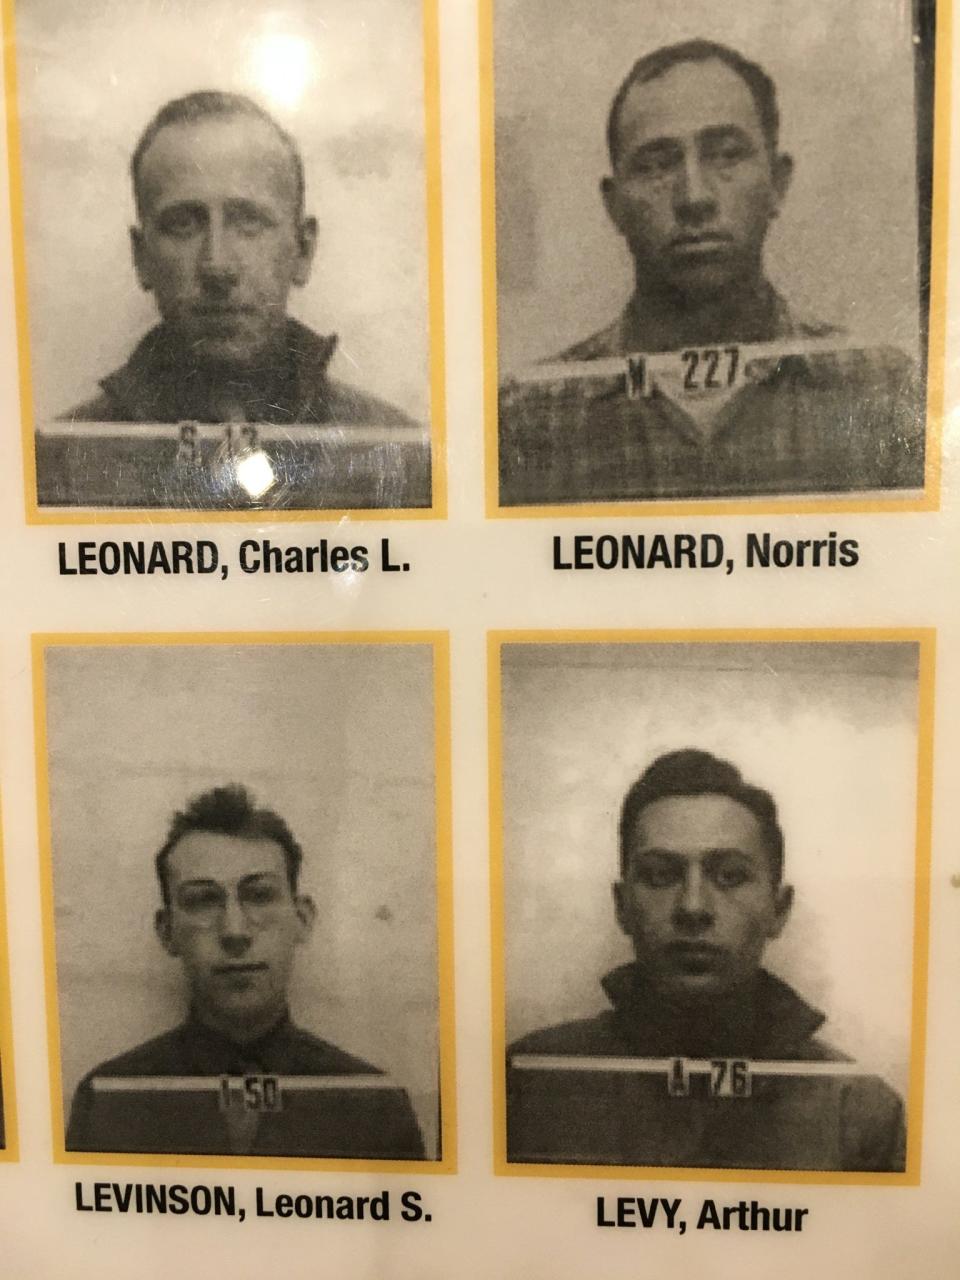 A picture of Arthur Levy's badge (bottom right) worn at the Manhattan Project's Los Alamos Laboratory, as shown in a binder at the  Bradbury Science Museum.